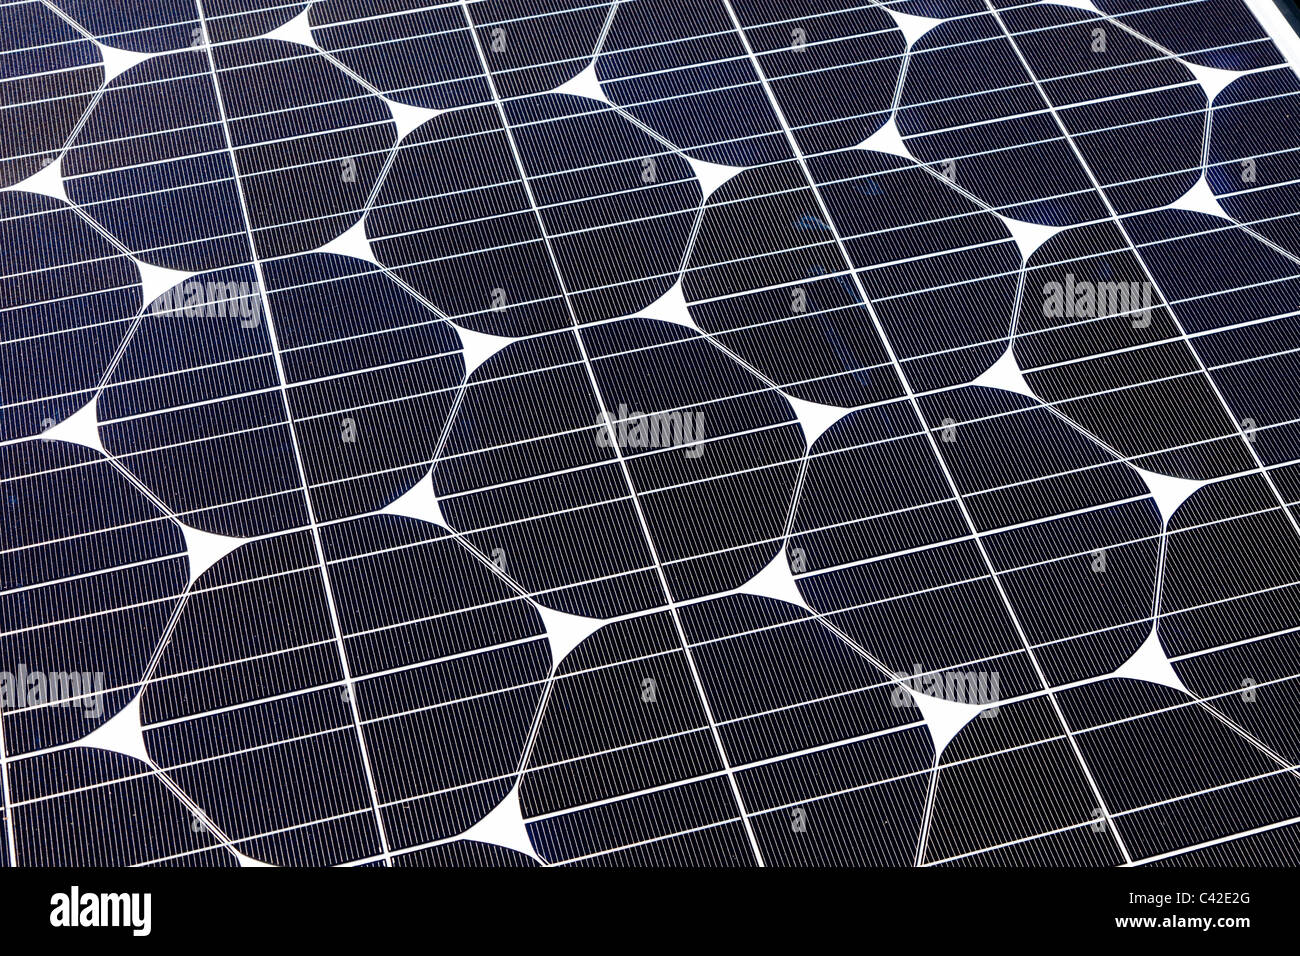 Cell structure of photovoltaic solar panel UK Stock Photo